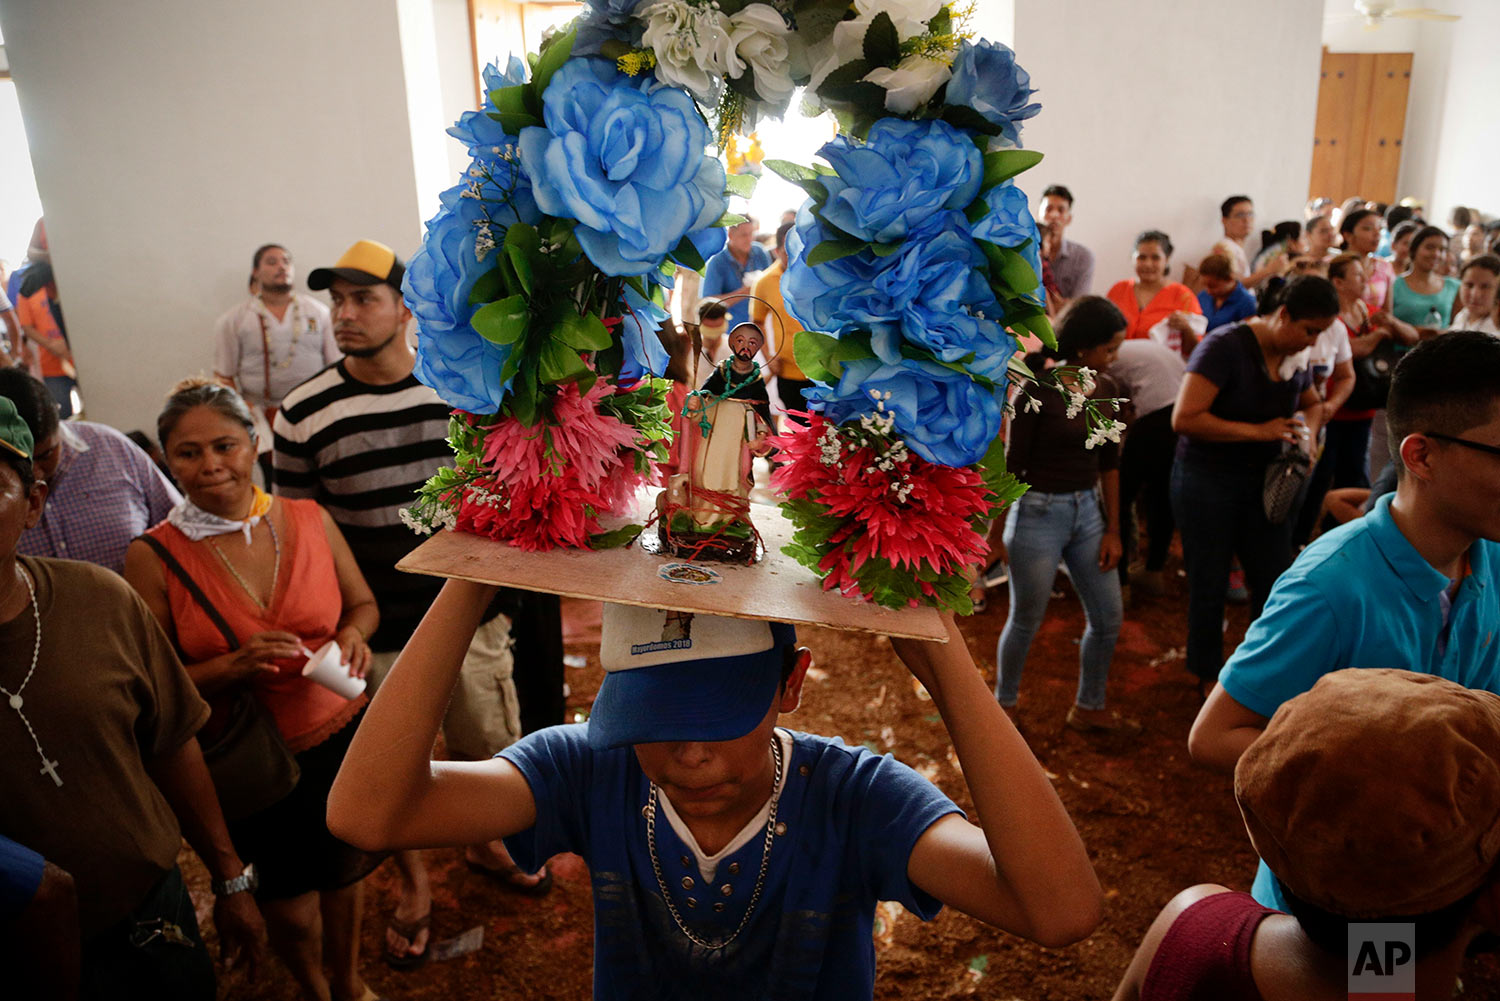  A youth holds up a statue of Santo Domingo de Guzman inside Las Sierritas church during Mass in honor of the saint in Managua, Nicaragua, July 31, 2018. The festival has its roots in the 1885 discovery of the 8-centimeter (a little over 3-inch) statue of Santo Domingo de Guzman, also known as St. Dominic de Guzman, the founder of the Dominican religious order. (AP Photo/Arnulfo Franco) 